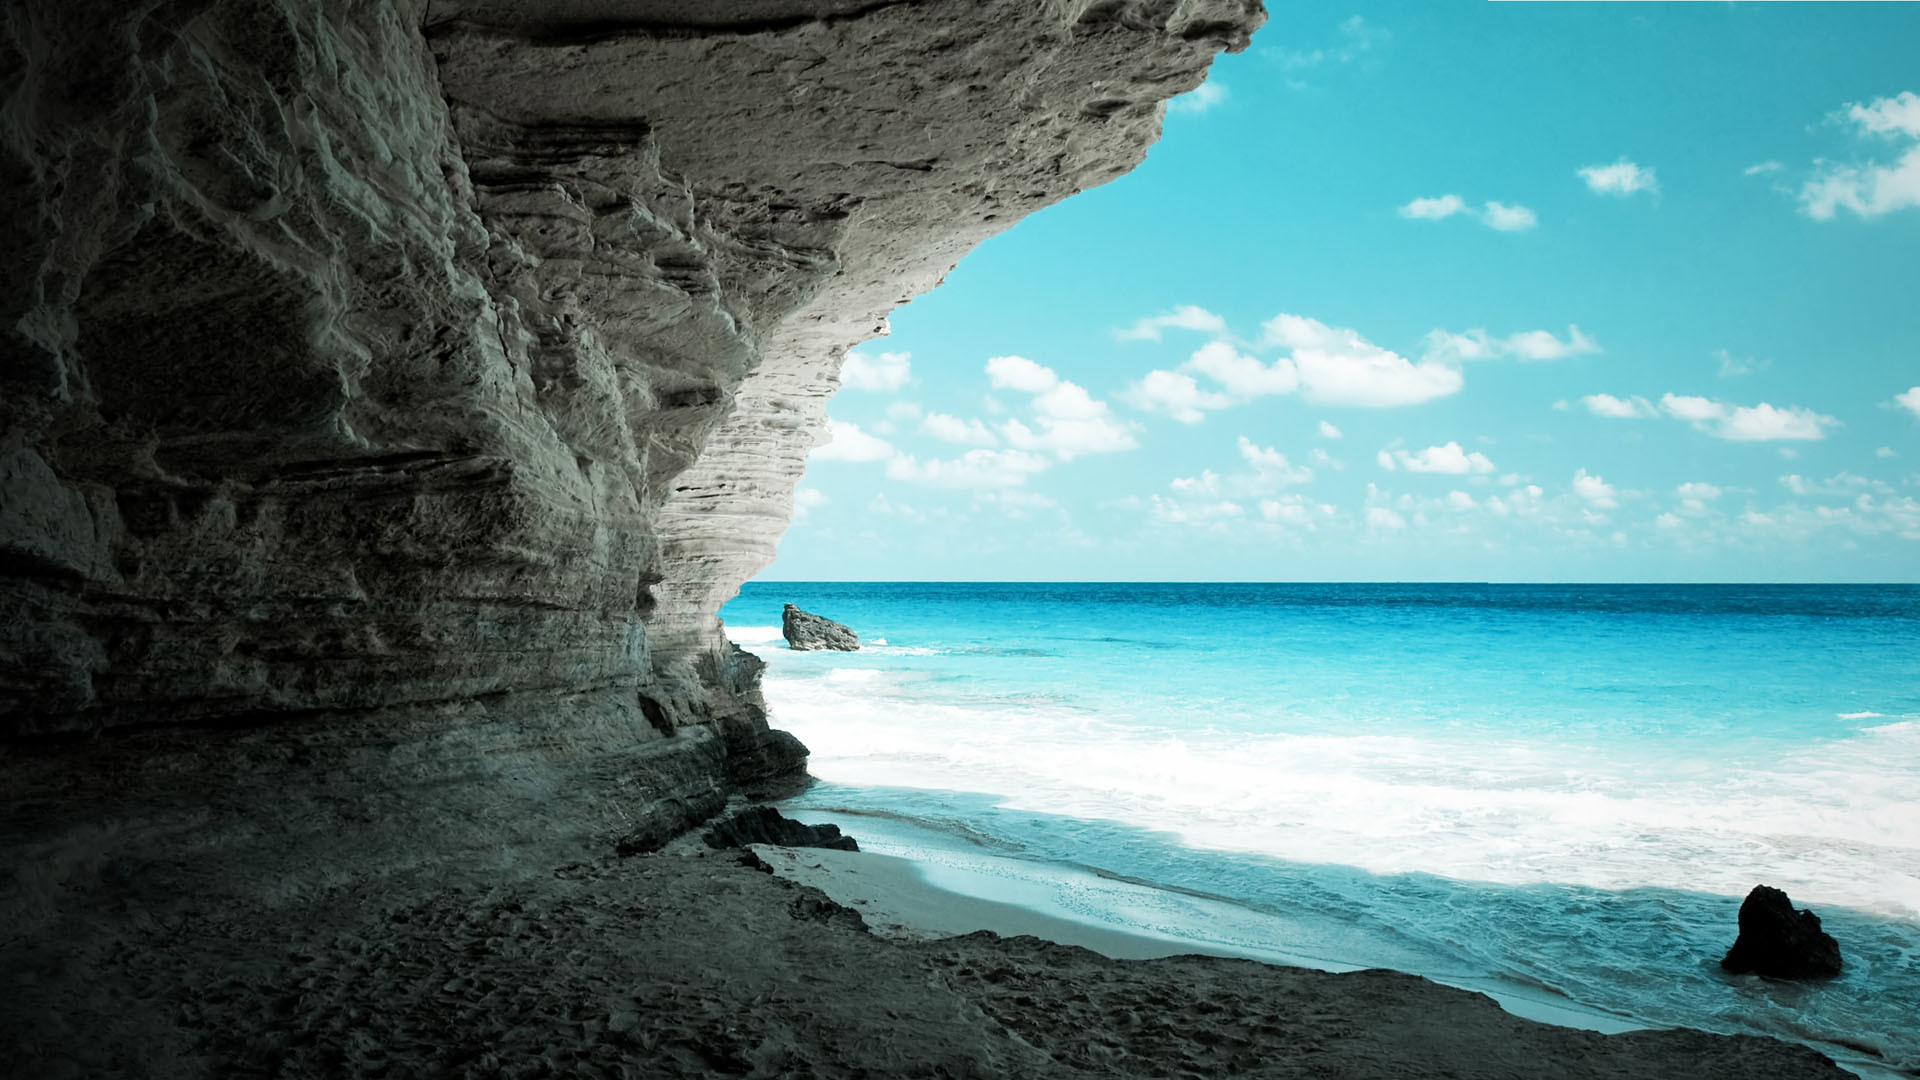 Amazing full hd wallpaper cave on the beach